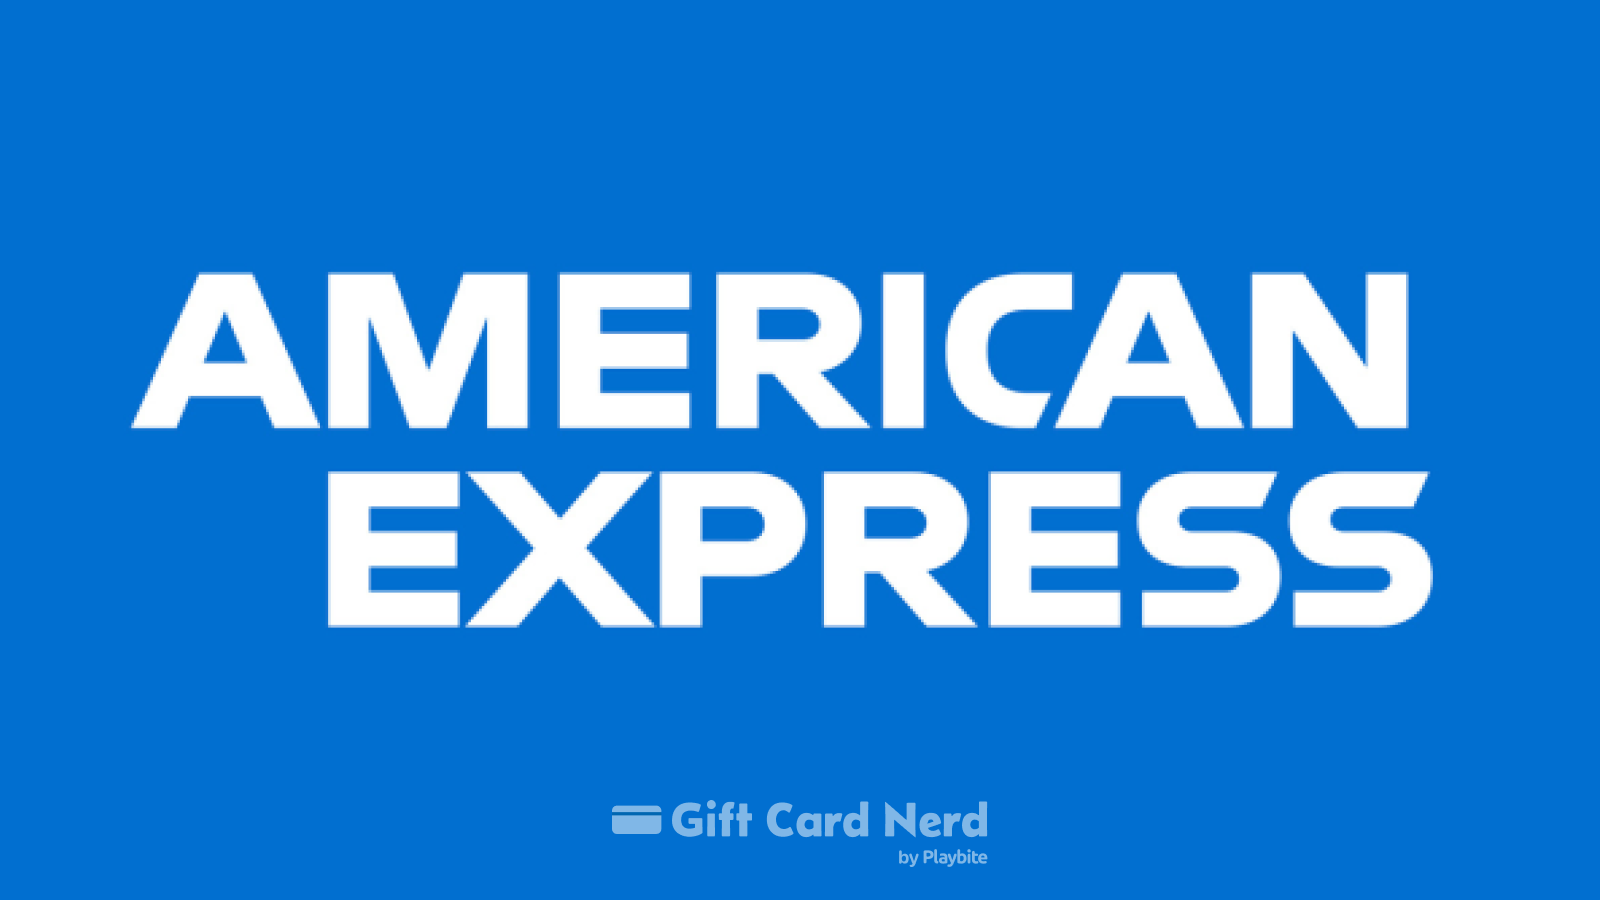 Does Walgreens Sell Amex Gift Cards?